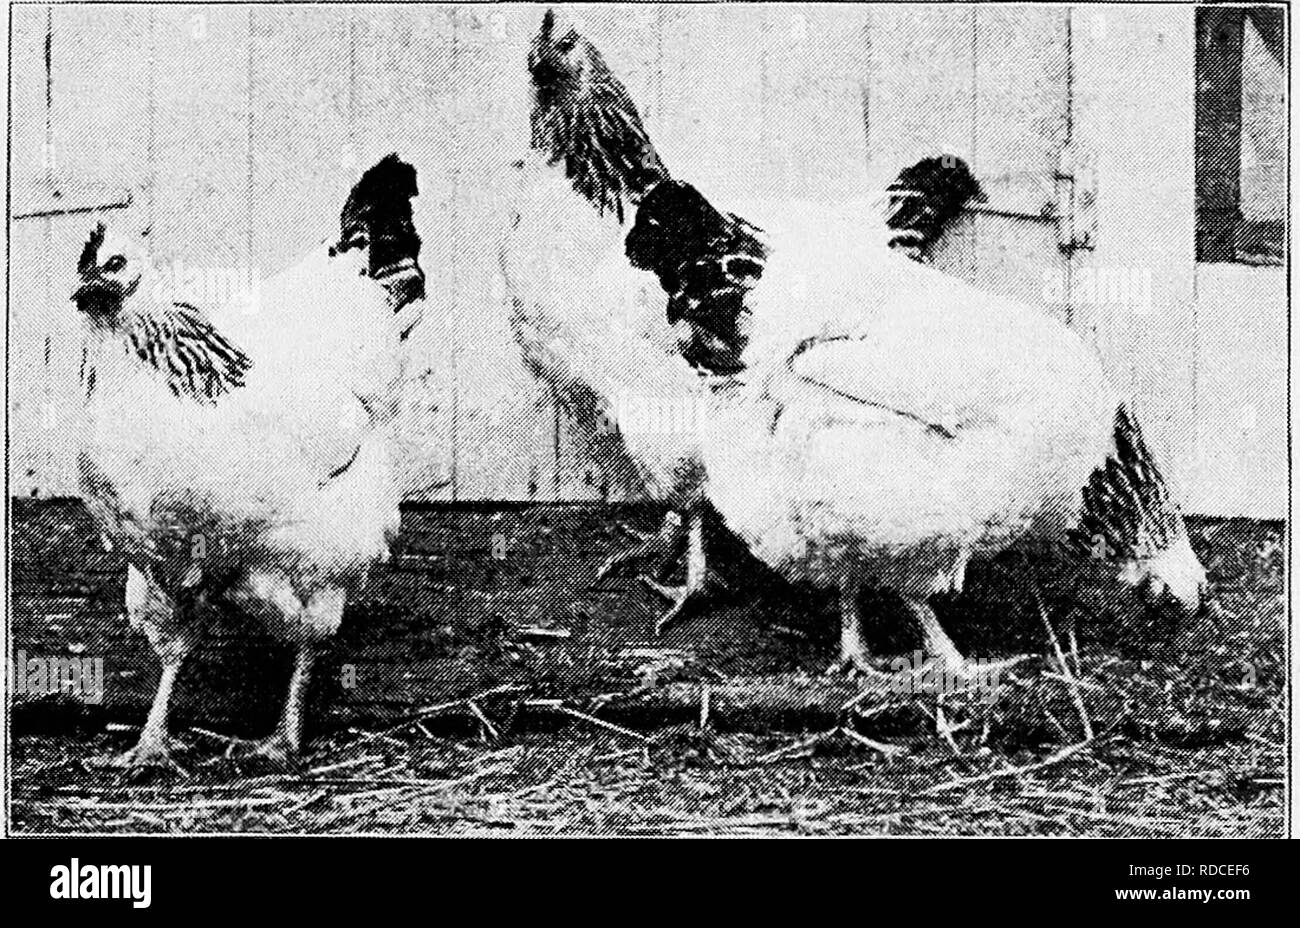 . Principles and practice of poultry culture . Poultry. TYPES, BREEDS, AND VARIETIES OF FOWLS 405 names this was applied to large black fowls with small single combs and smooth yellow or yellowish legs. In the early history of the Barred Plymouth Rock many black specimens were produced. These seem to have been the chief source of supply, though doubtless other black fowls were used. The Black Java was the prin- cipal variety given this name, but there were also white and mottled (black-and-white) birds of this type, •— these being colors likely to occur in rever- sion and (coming from the Java Stock Photo